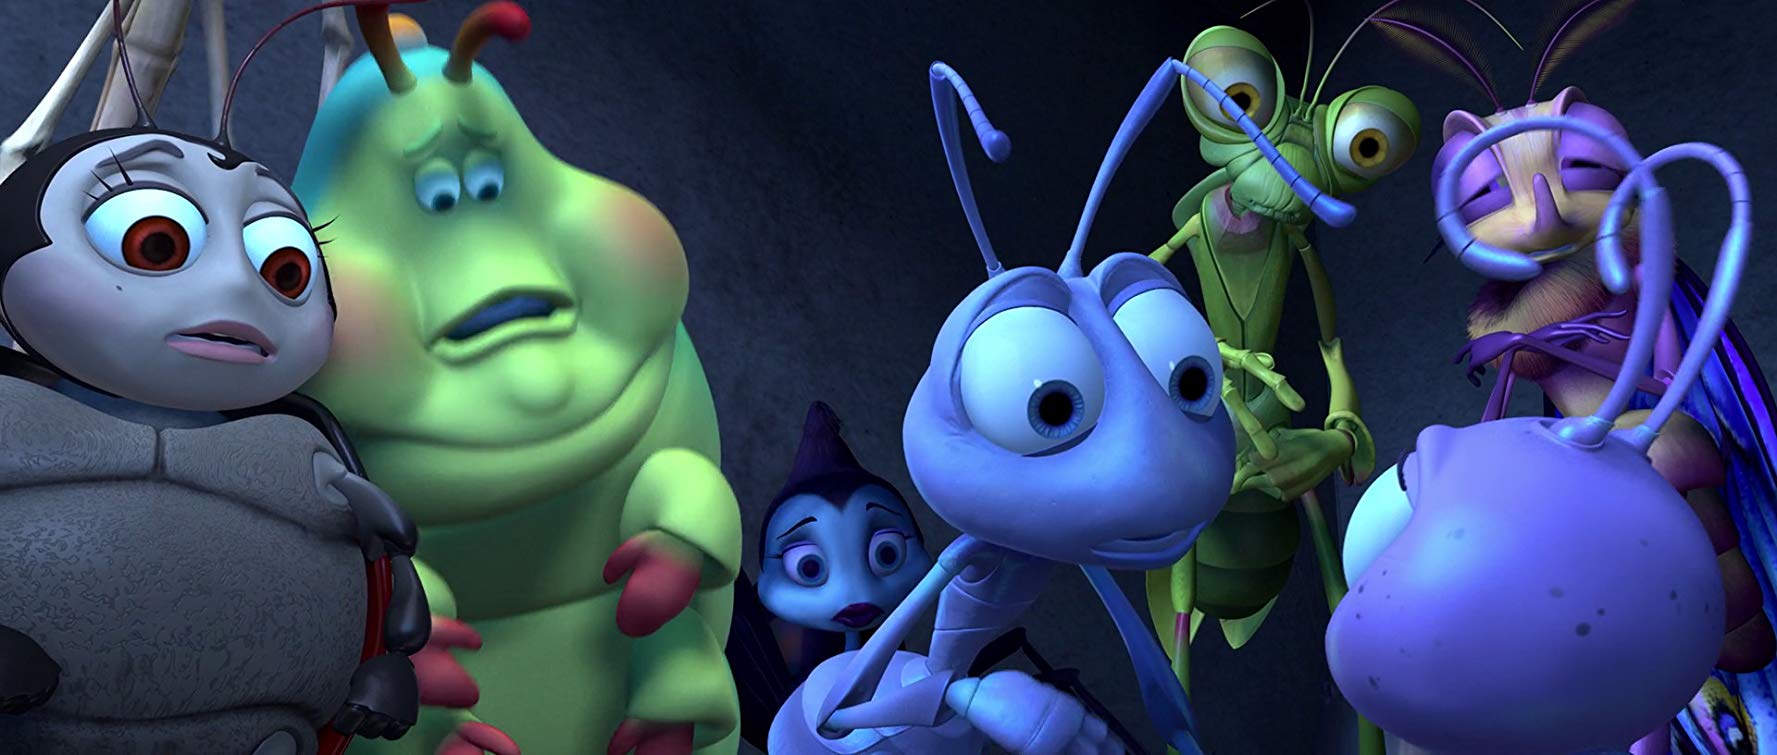 How to watch A Bug's Life: Reviewed